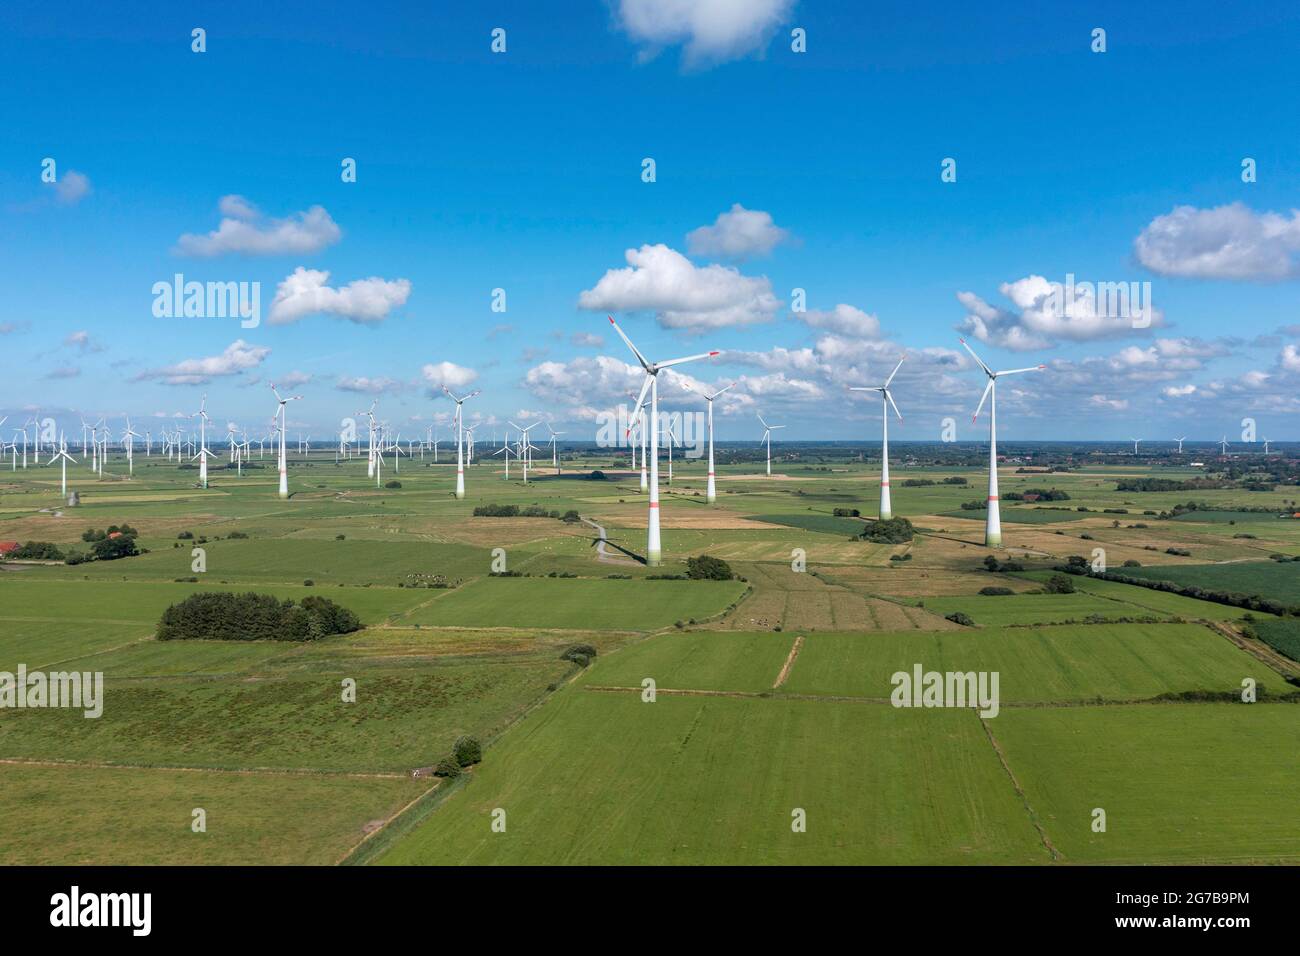 Aerial view with wind farm, Arle, Lower Saxony, Germany Stock Photo